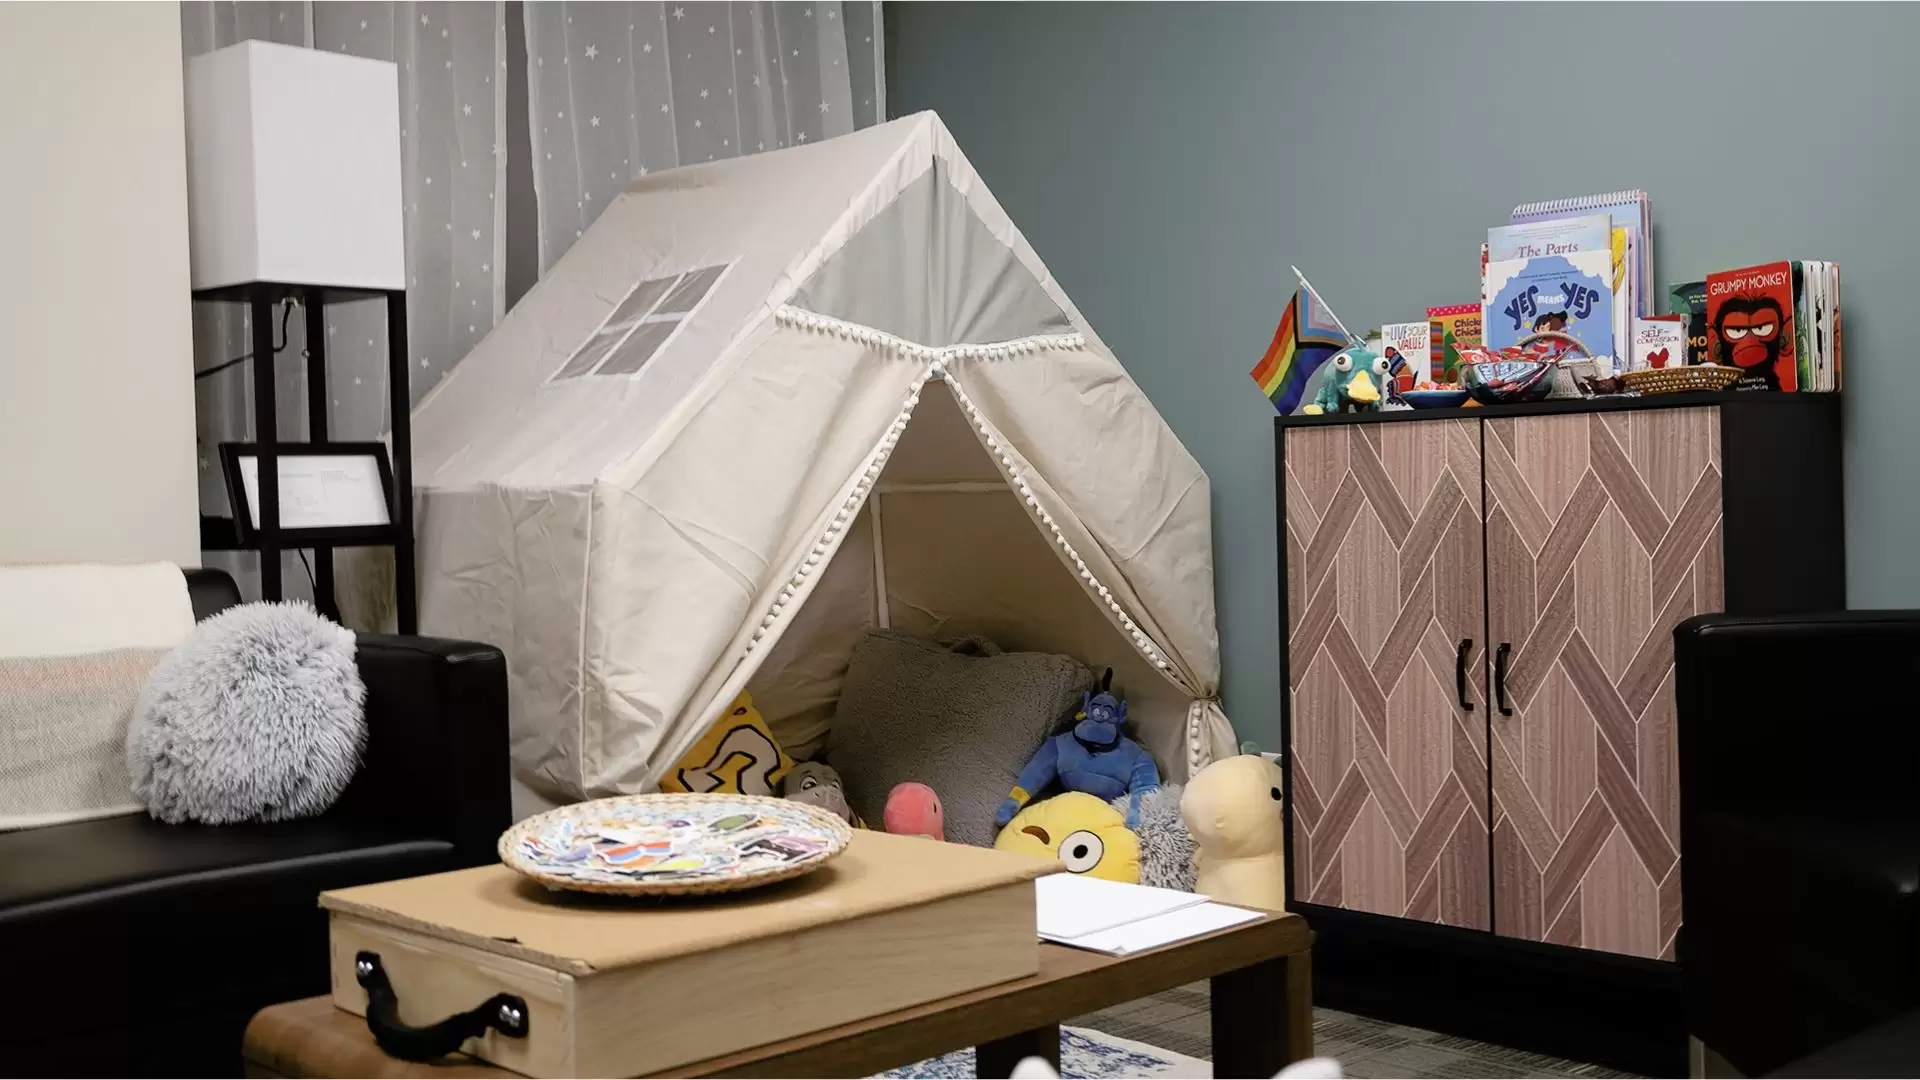 Youth counsellor office with a small cabin style tent filled with plus toys and pillows. A cabinet with children and youth books displayed on the top sits against the wall with a small table and chair in the middle of the office.